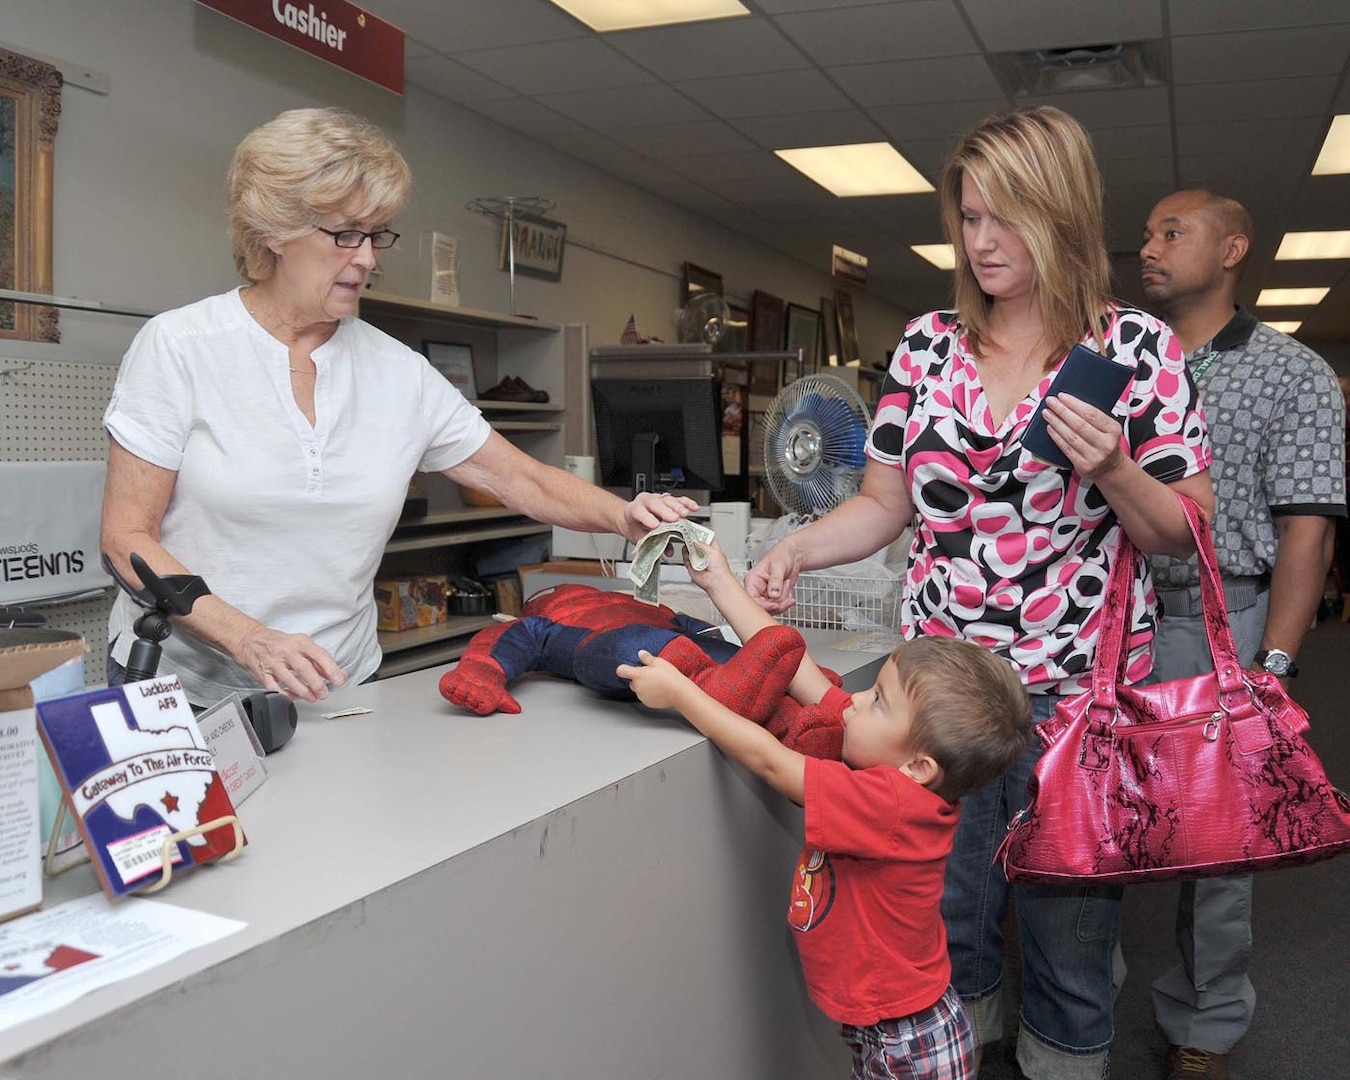 Twila Garcia looks on as son, Domenic, 3, pays thrift shop cashier June Christy for a Spiderman doll during the grand opening of the One Stop facility Sept. 28. Domenic’s father is Capt. Luis Garcia, 837th Training Squadron, Inter-American Air Forces Academy. Patrons wait patiently for the grand opening of the new One Stop facility Sept 28. (U.S. Air Force photo/Alan Boedeker)